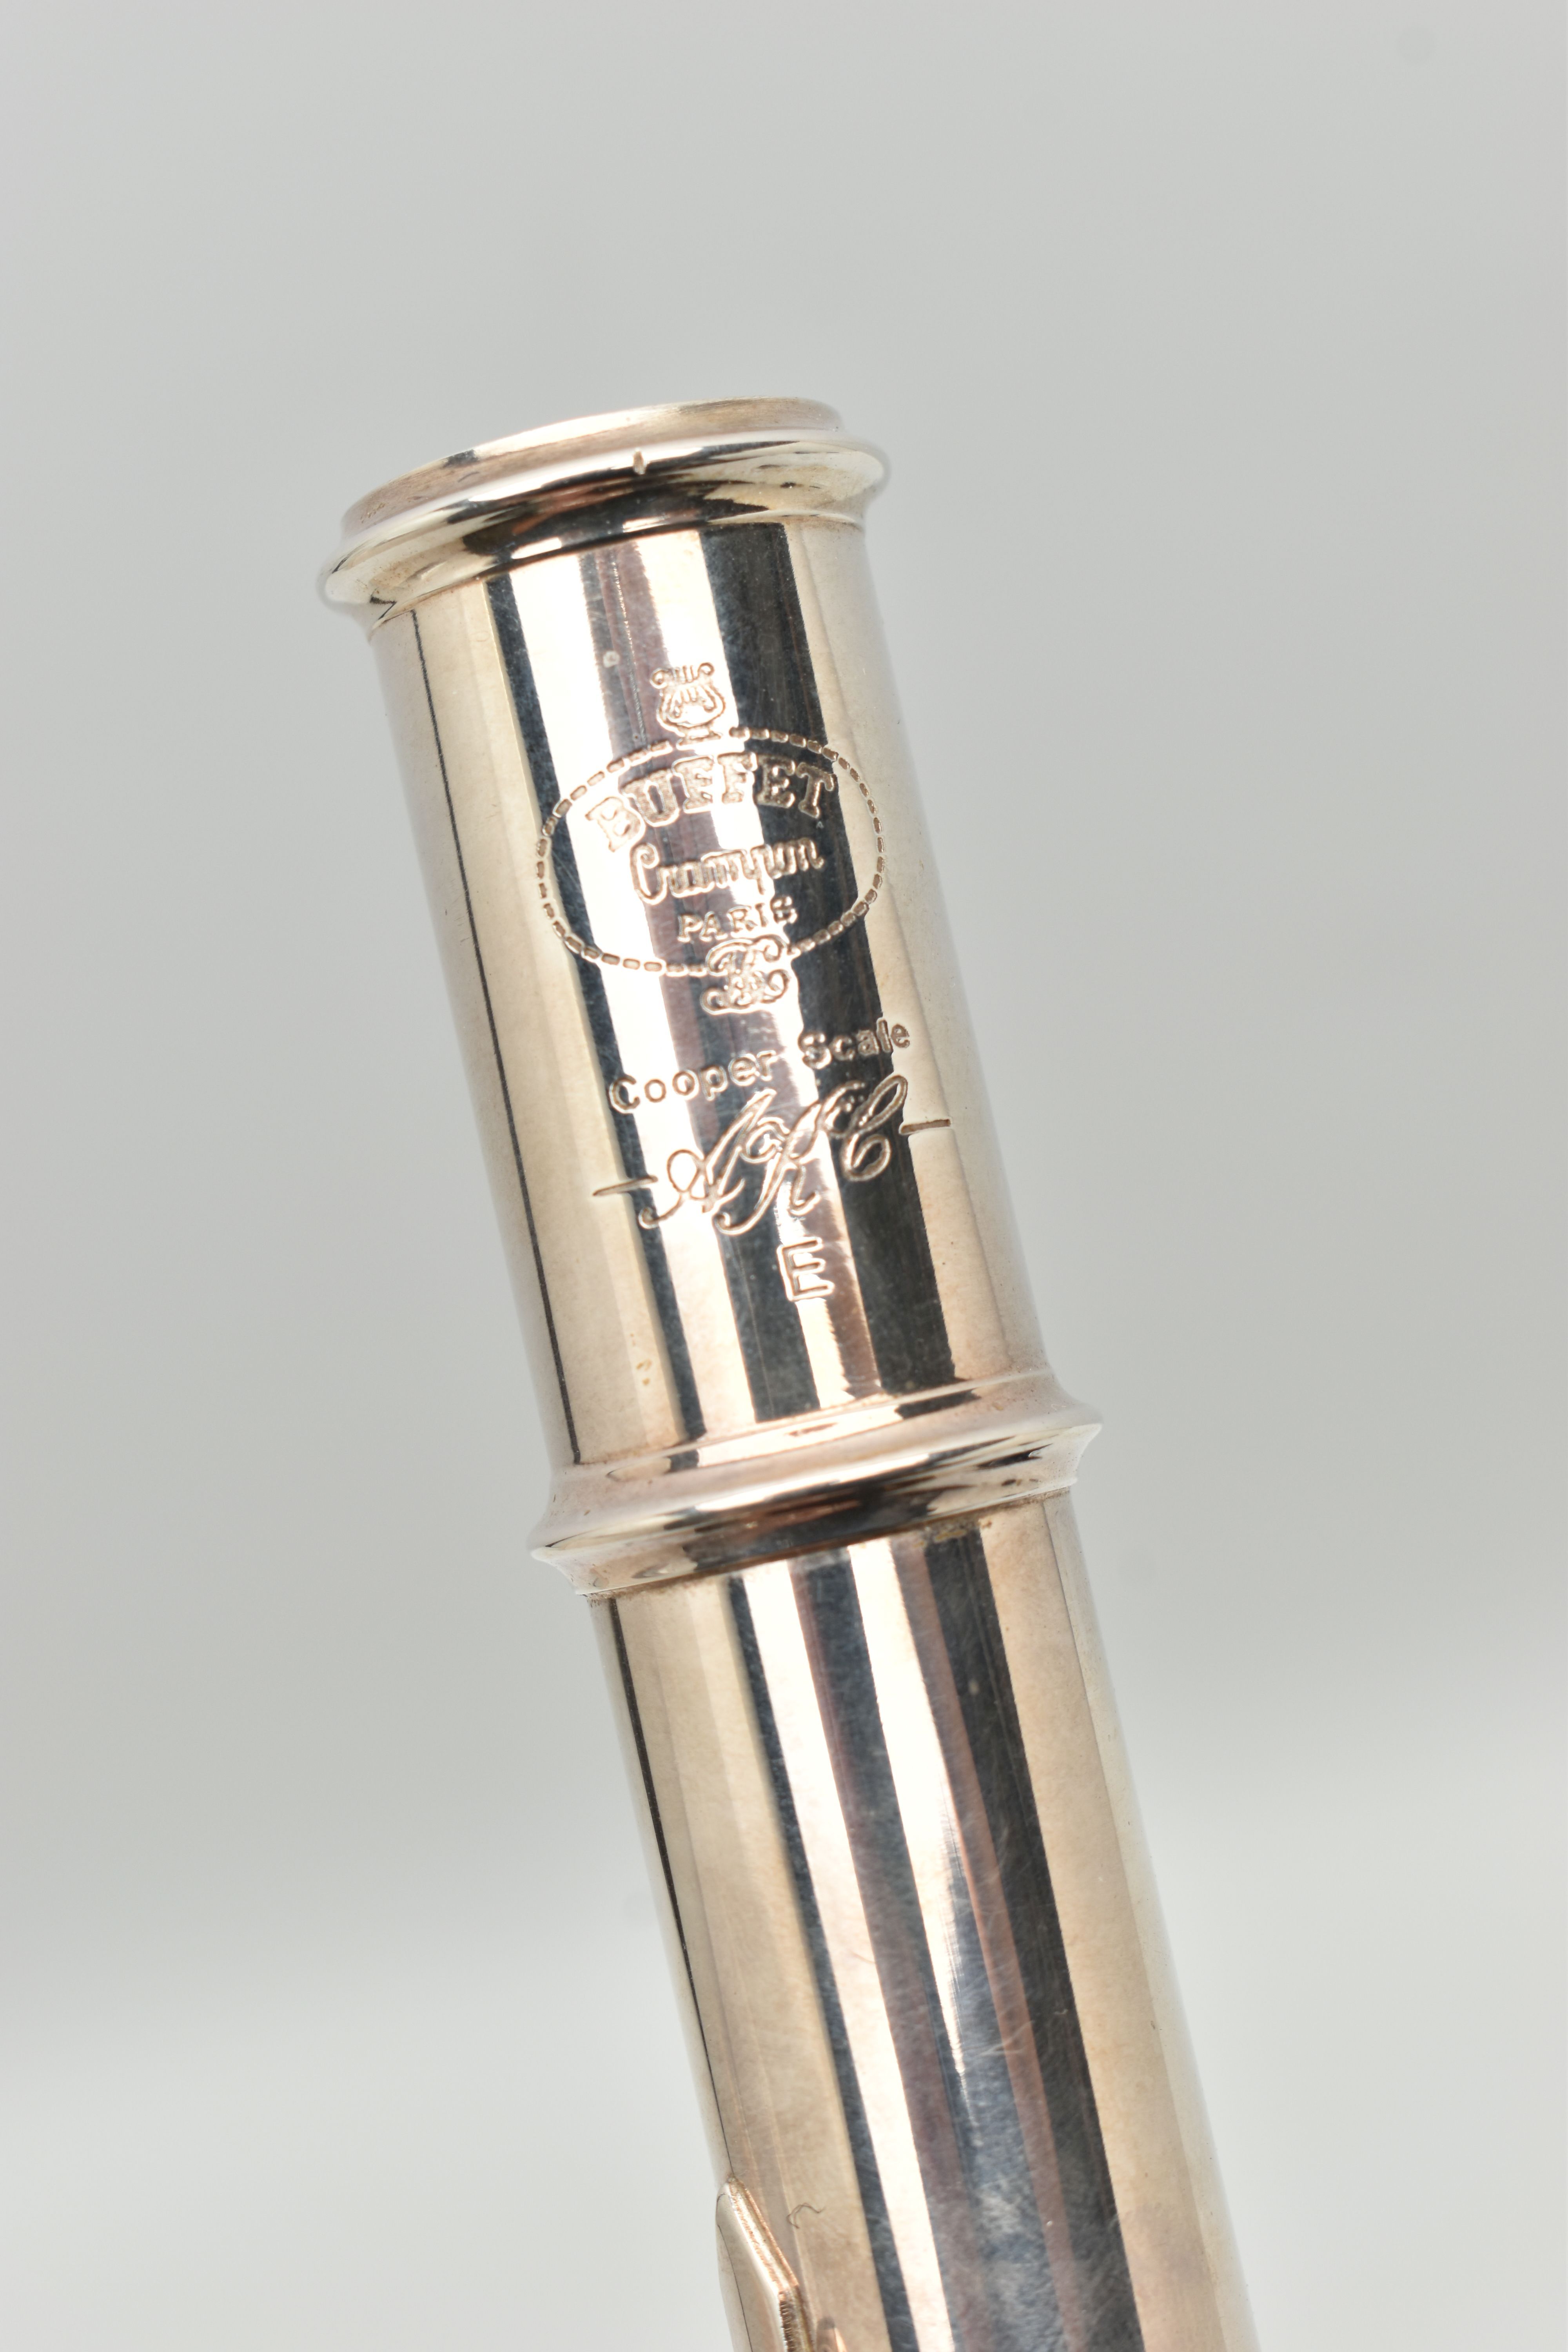 A FRENCH SILVER PLATED FLUTE, BUFFET CAMPON COOPER 228, in good working order - Image 4 of 10